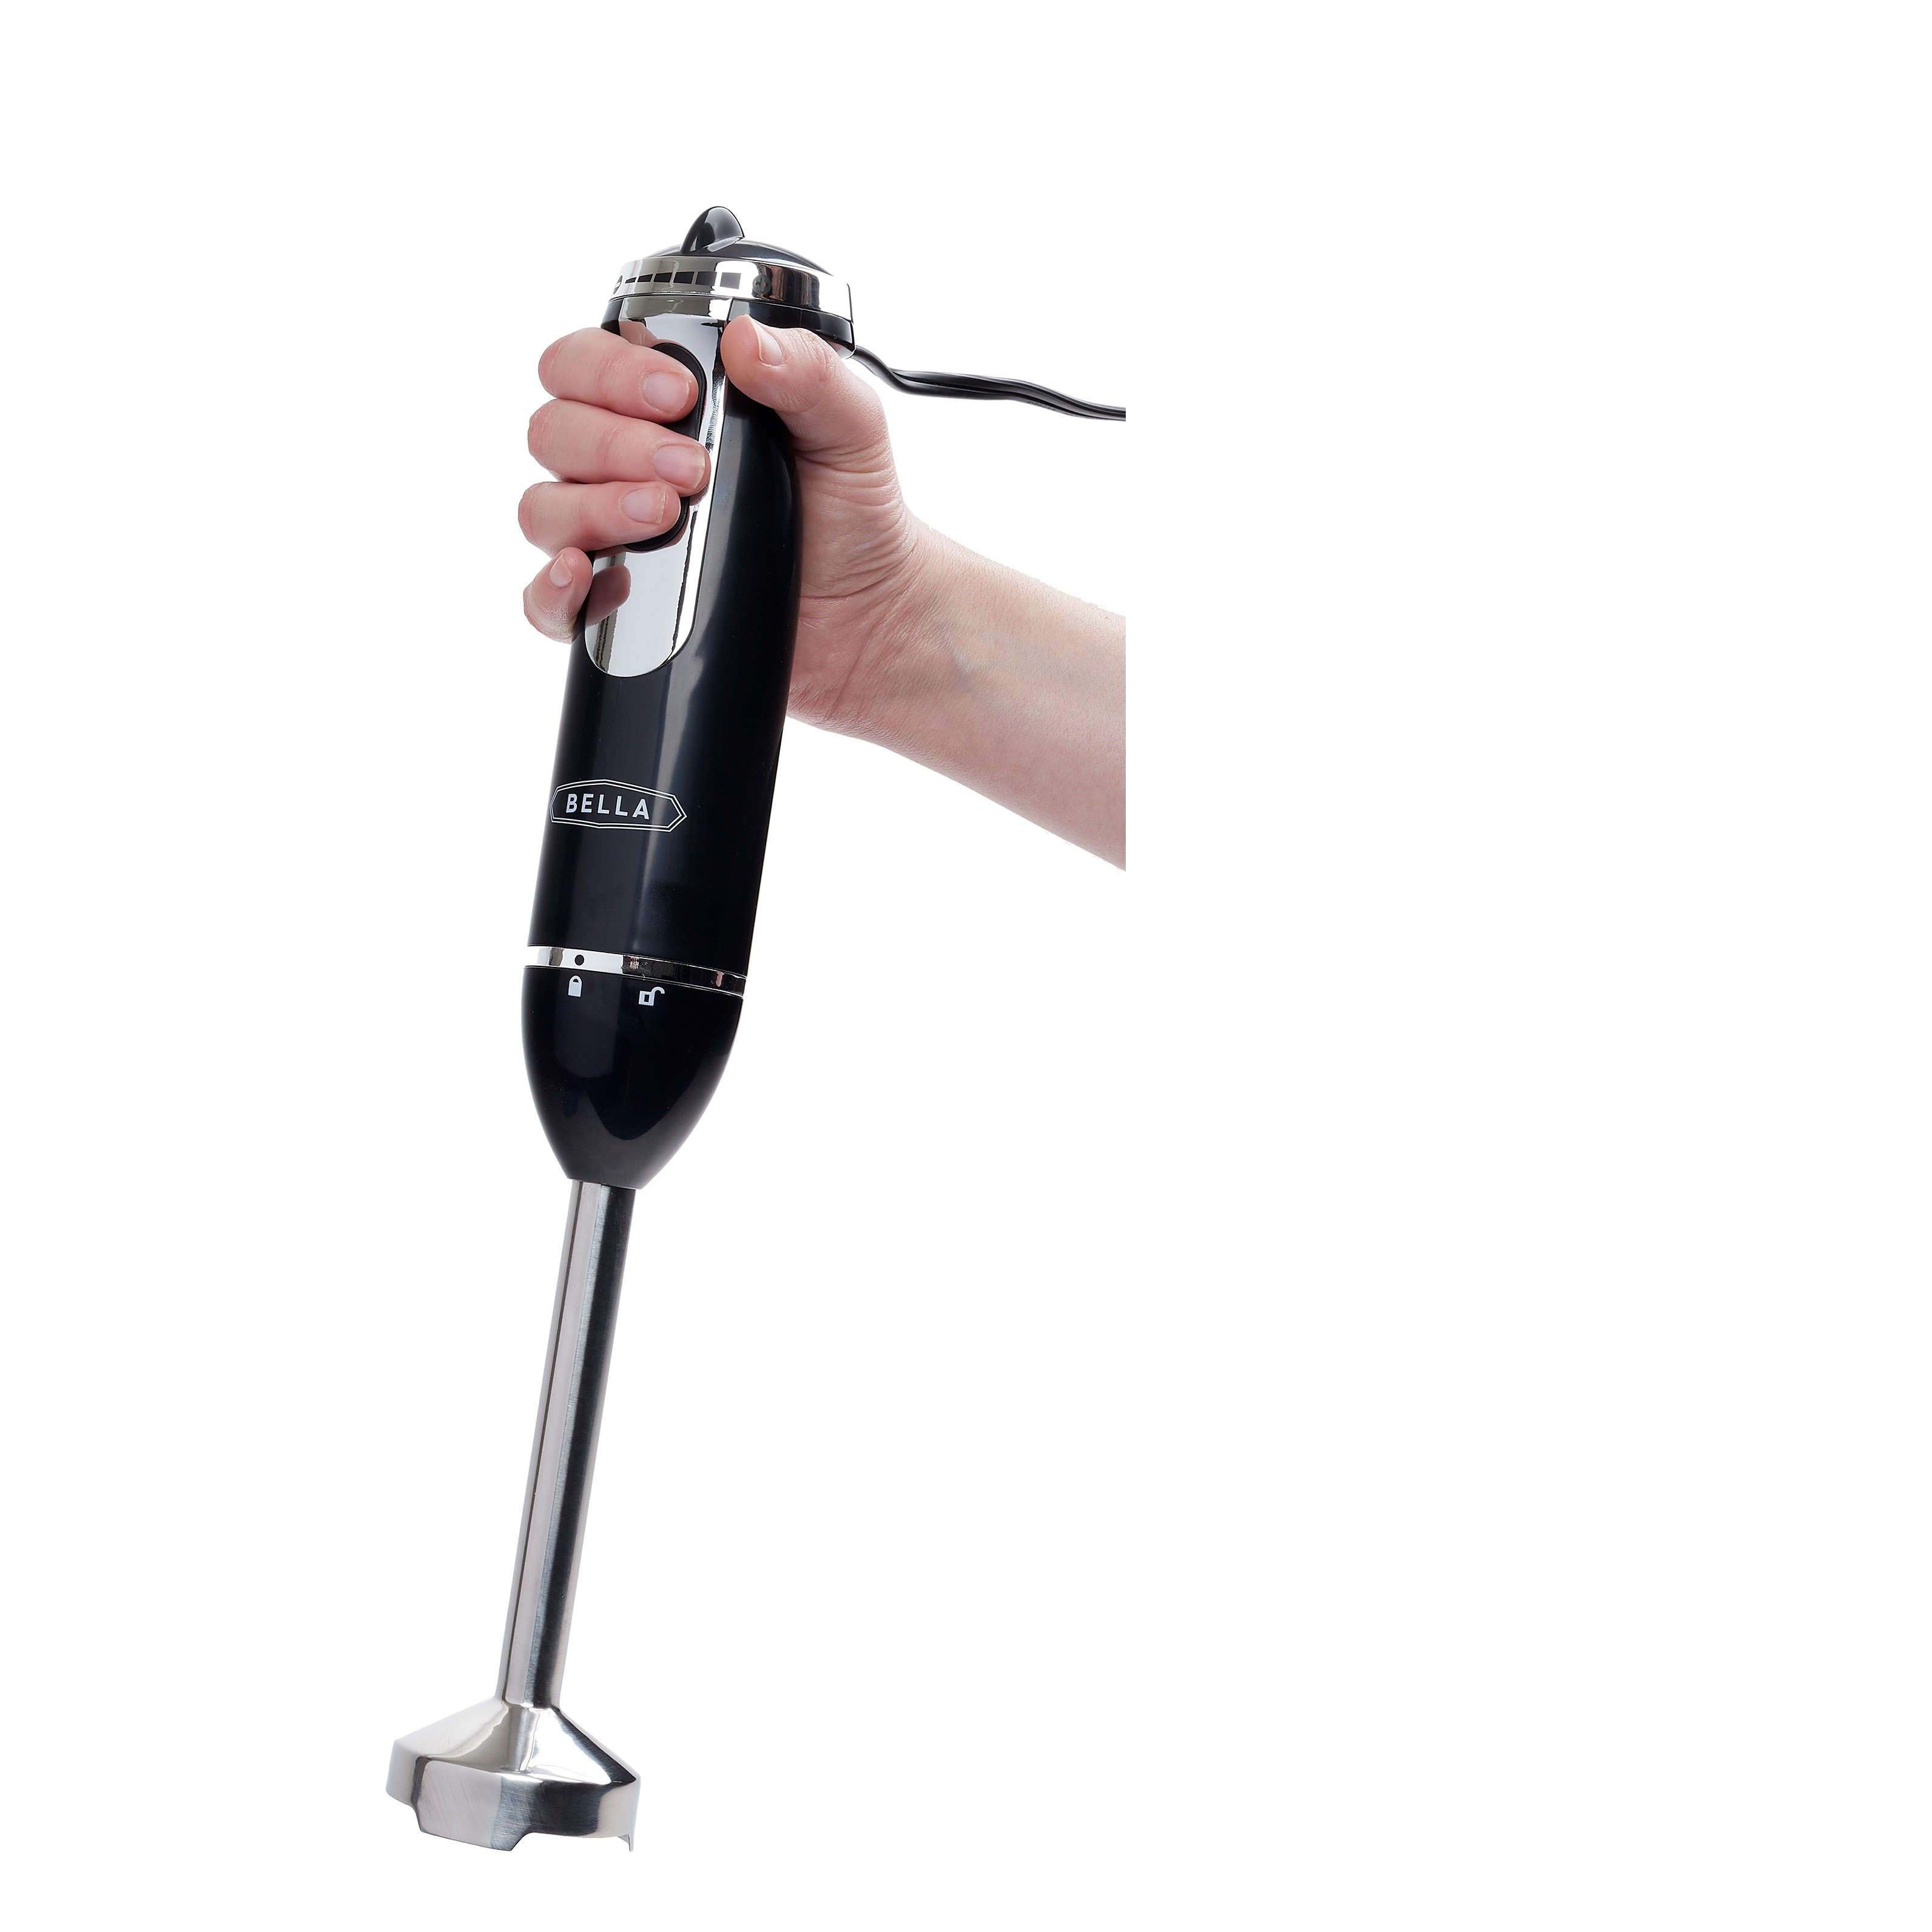 The Bella 10-Speed Immersion Blender In-depth Review - Healthy Kitchen 101